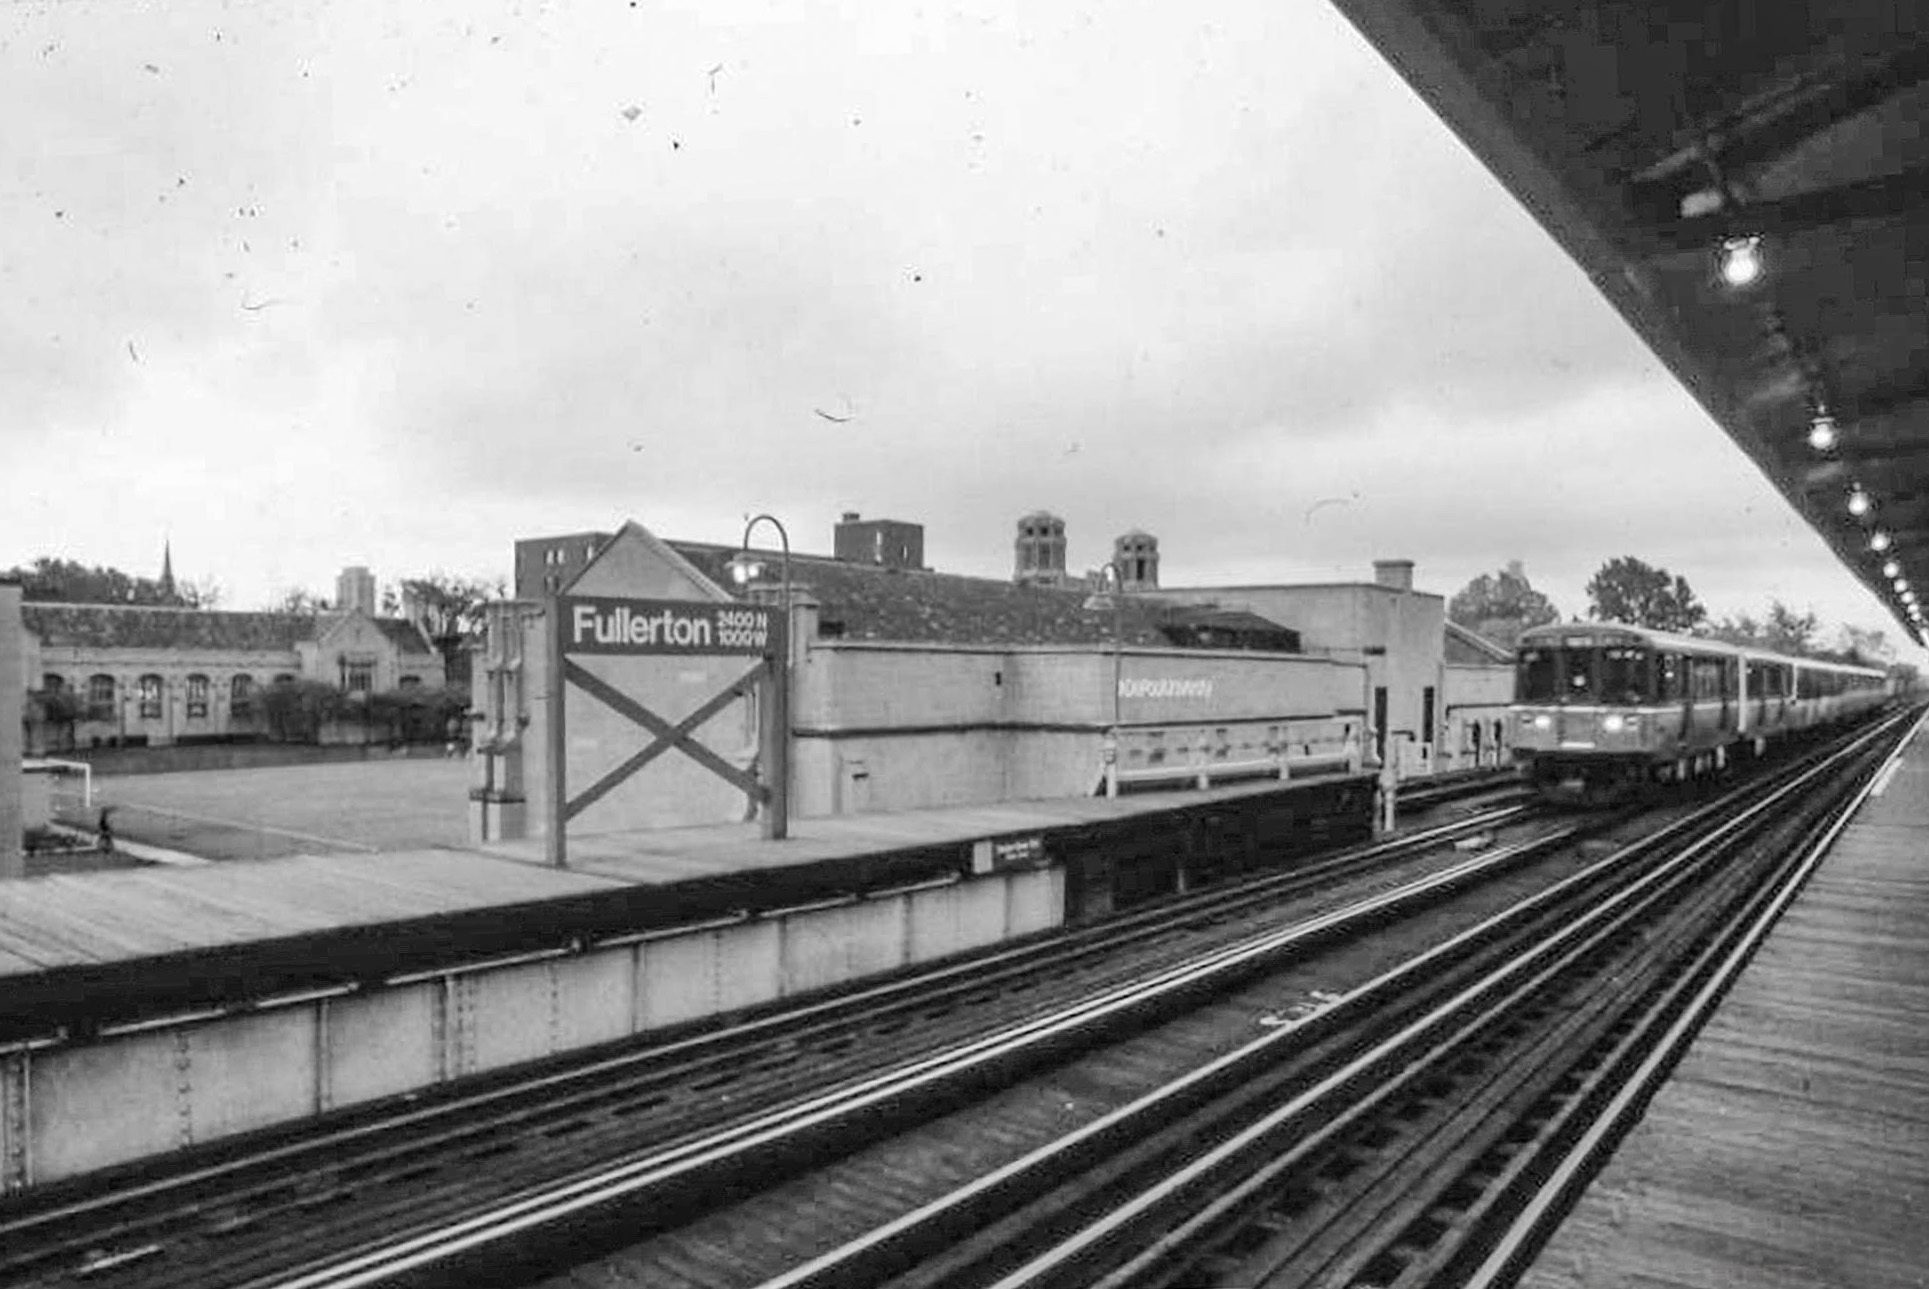 The Fullerton Station on DePaul’s Lincoln Park Campus is shown in 1978. The station has wooden platforms on either side of the tracks. A CTA train is approaching the station. Behind the station is an athletic field, surrounded by buildings with triangular roofs.